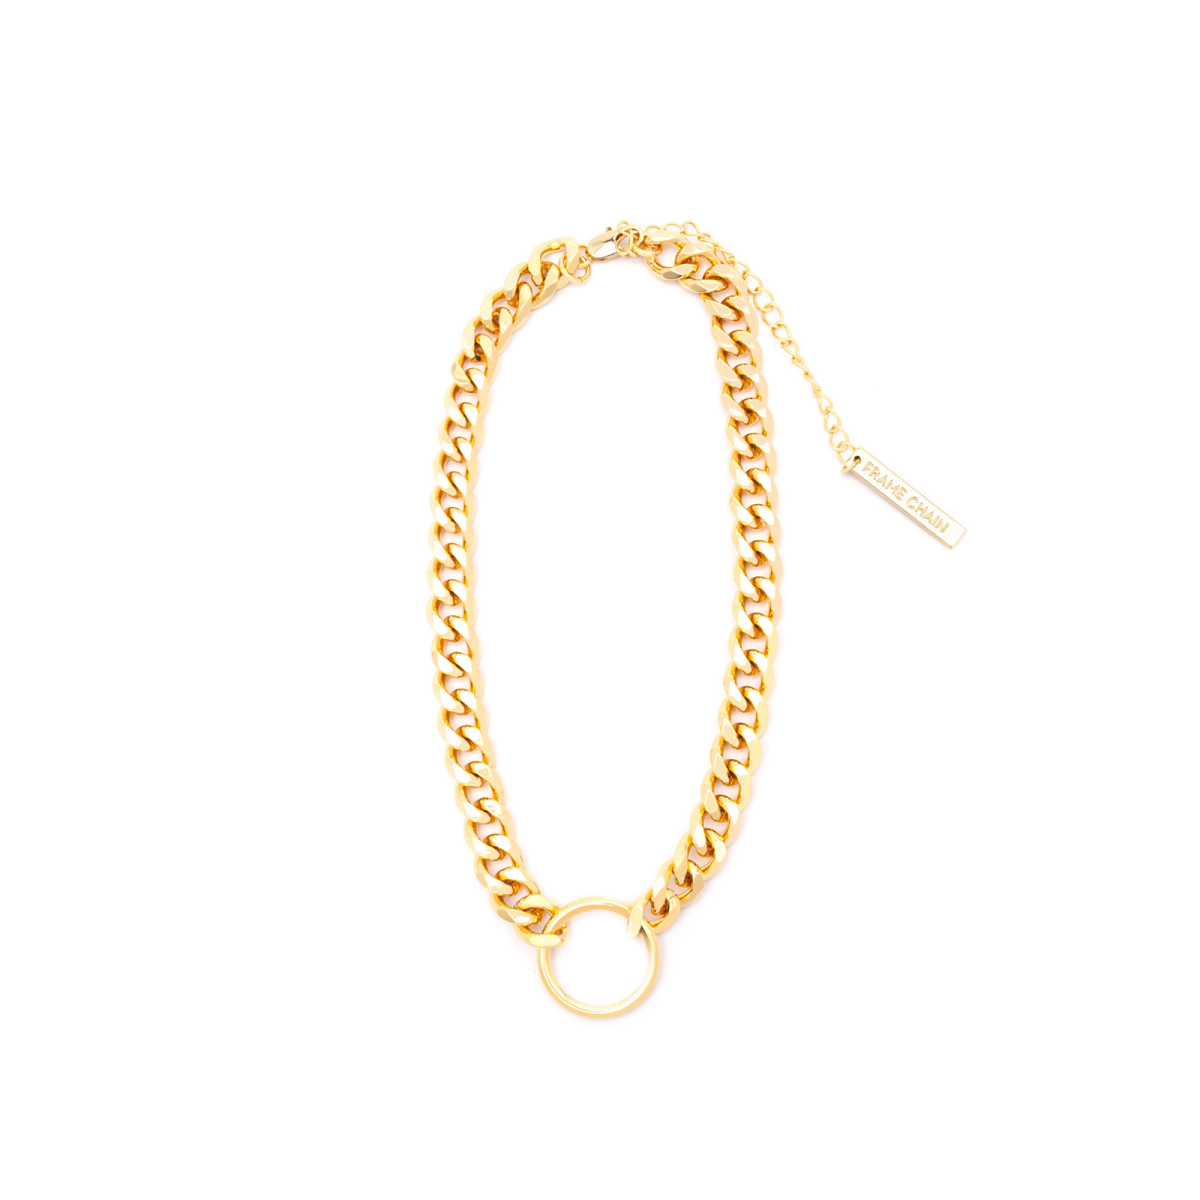 Frame Chain HOOKER YELLOW GOLD  YELLOW GOLD - product thumbnail 2/6